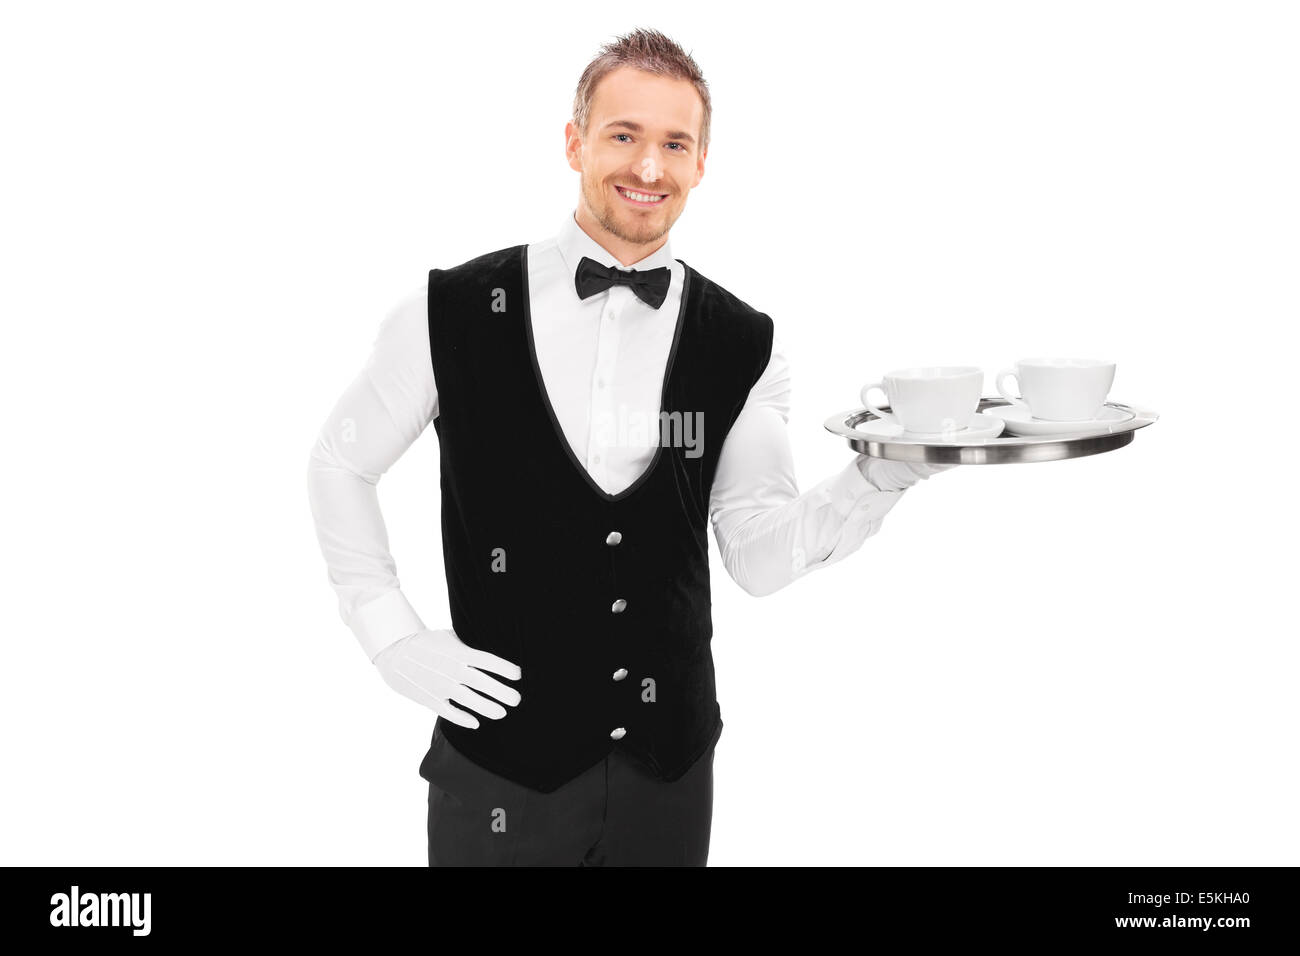 Male butler holding a tray with two cups of coffee Stock Photo